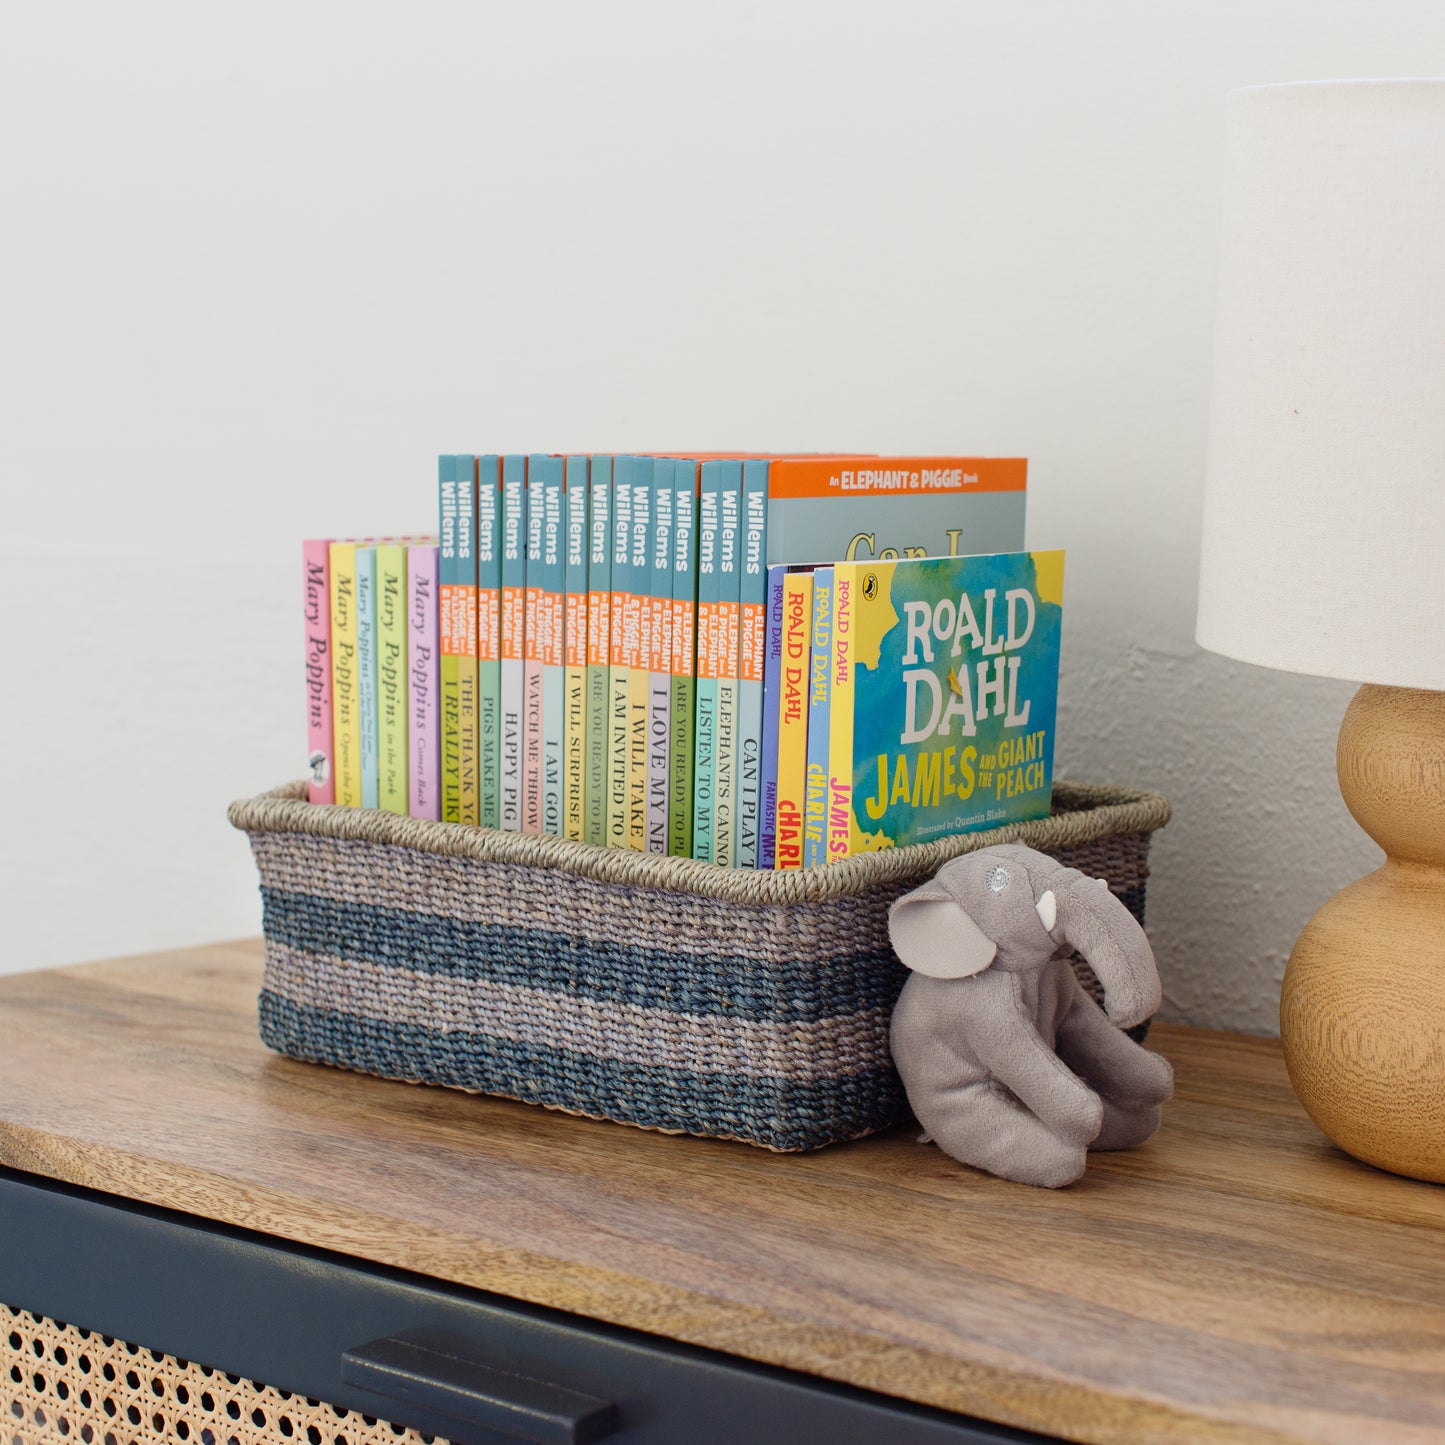 Woven Catchall Storage Tray | Blue